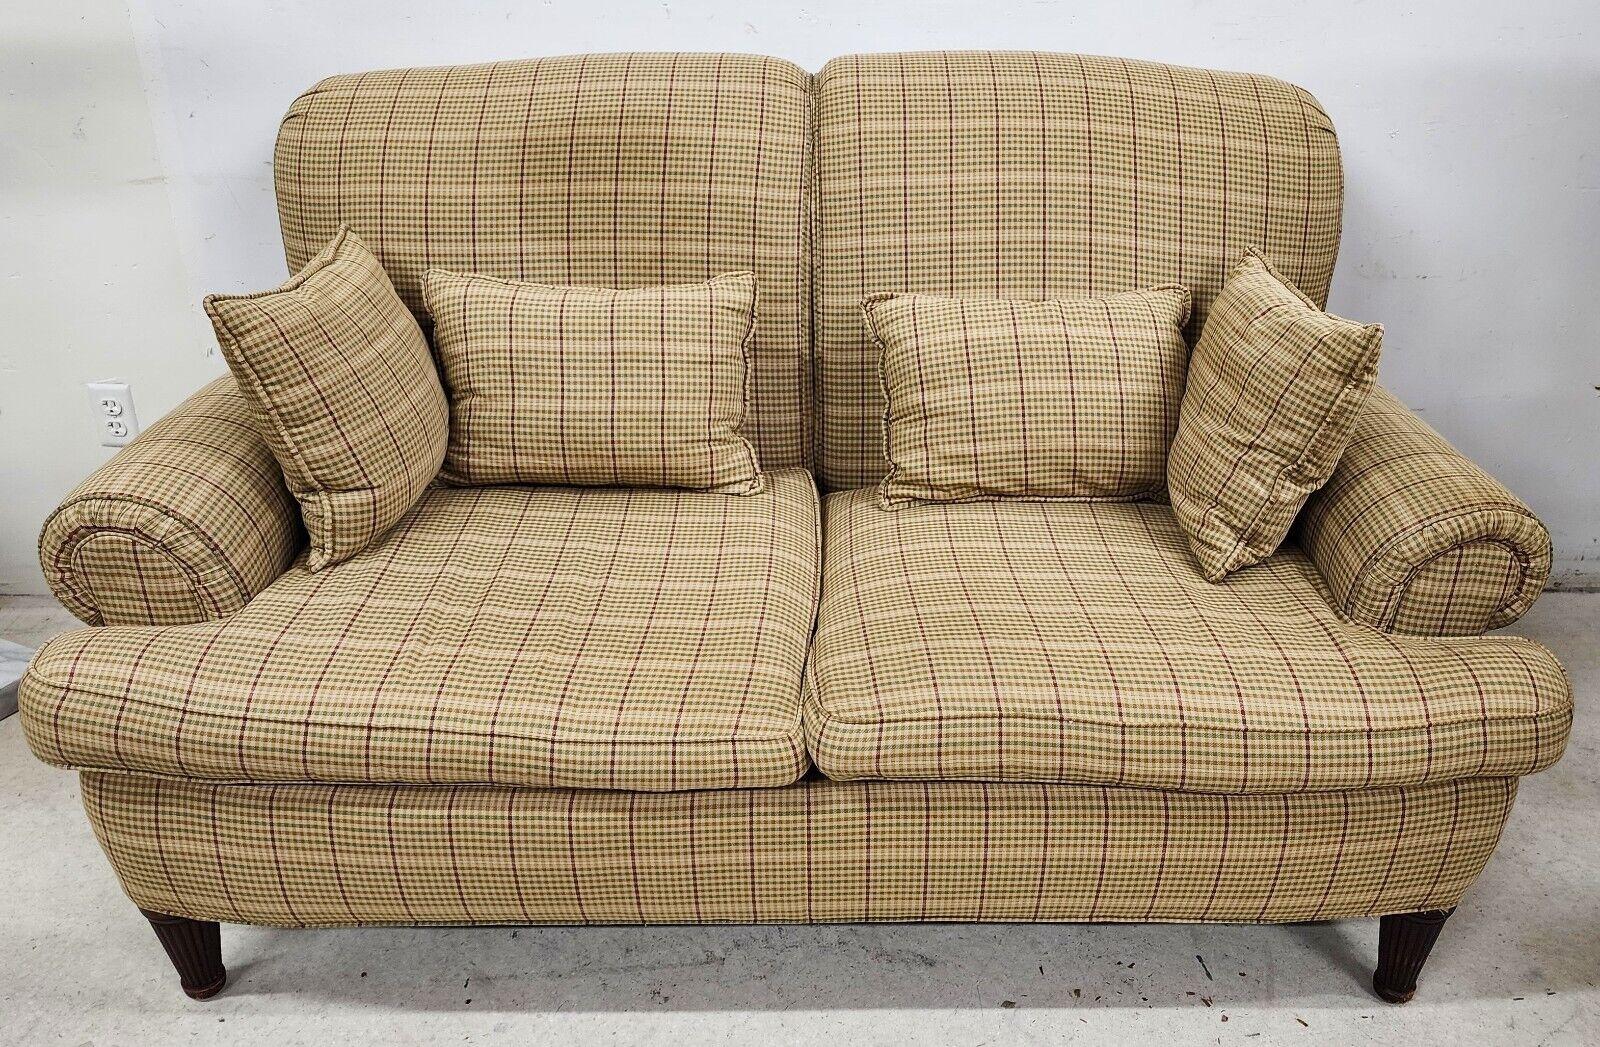 Offering One of our recent palm beach estate fine furniture acquisitions of a
Vintage settee loveseat by Ralph Lauren
Comes with 4 matching throw pillows

Approximate measurements in inches
38